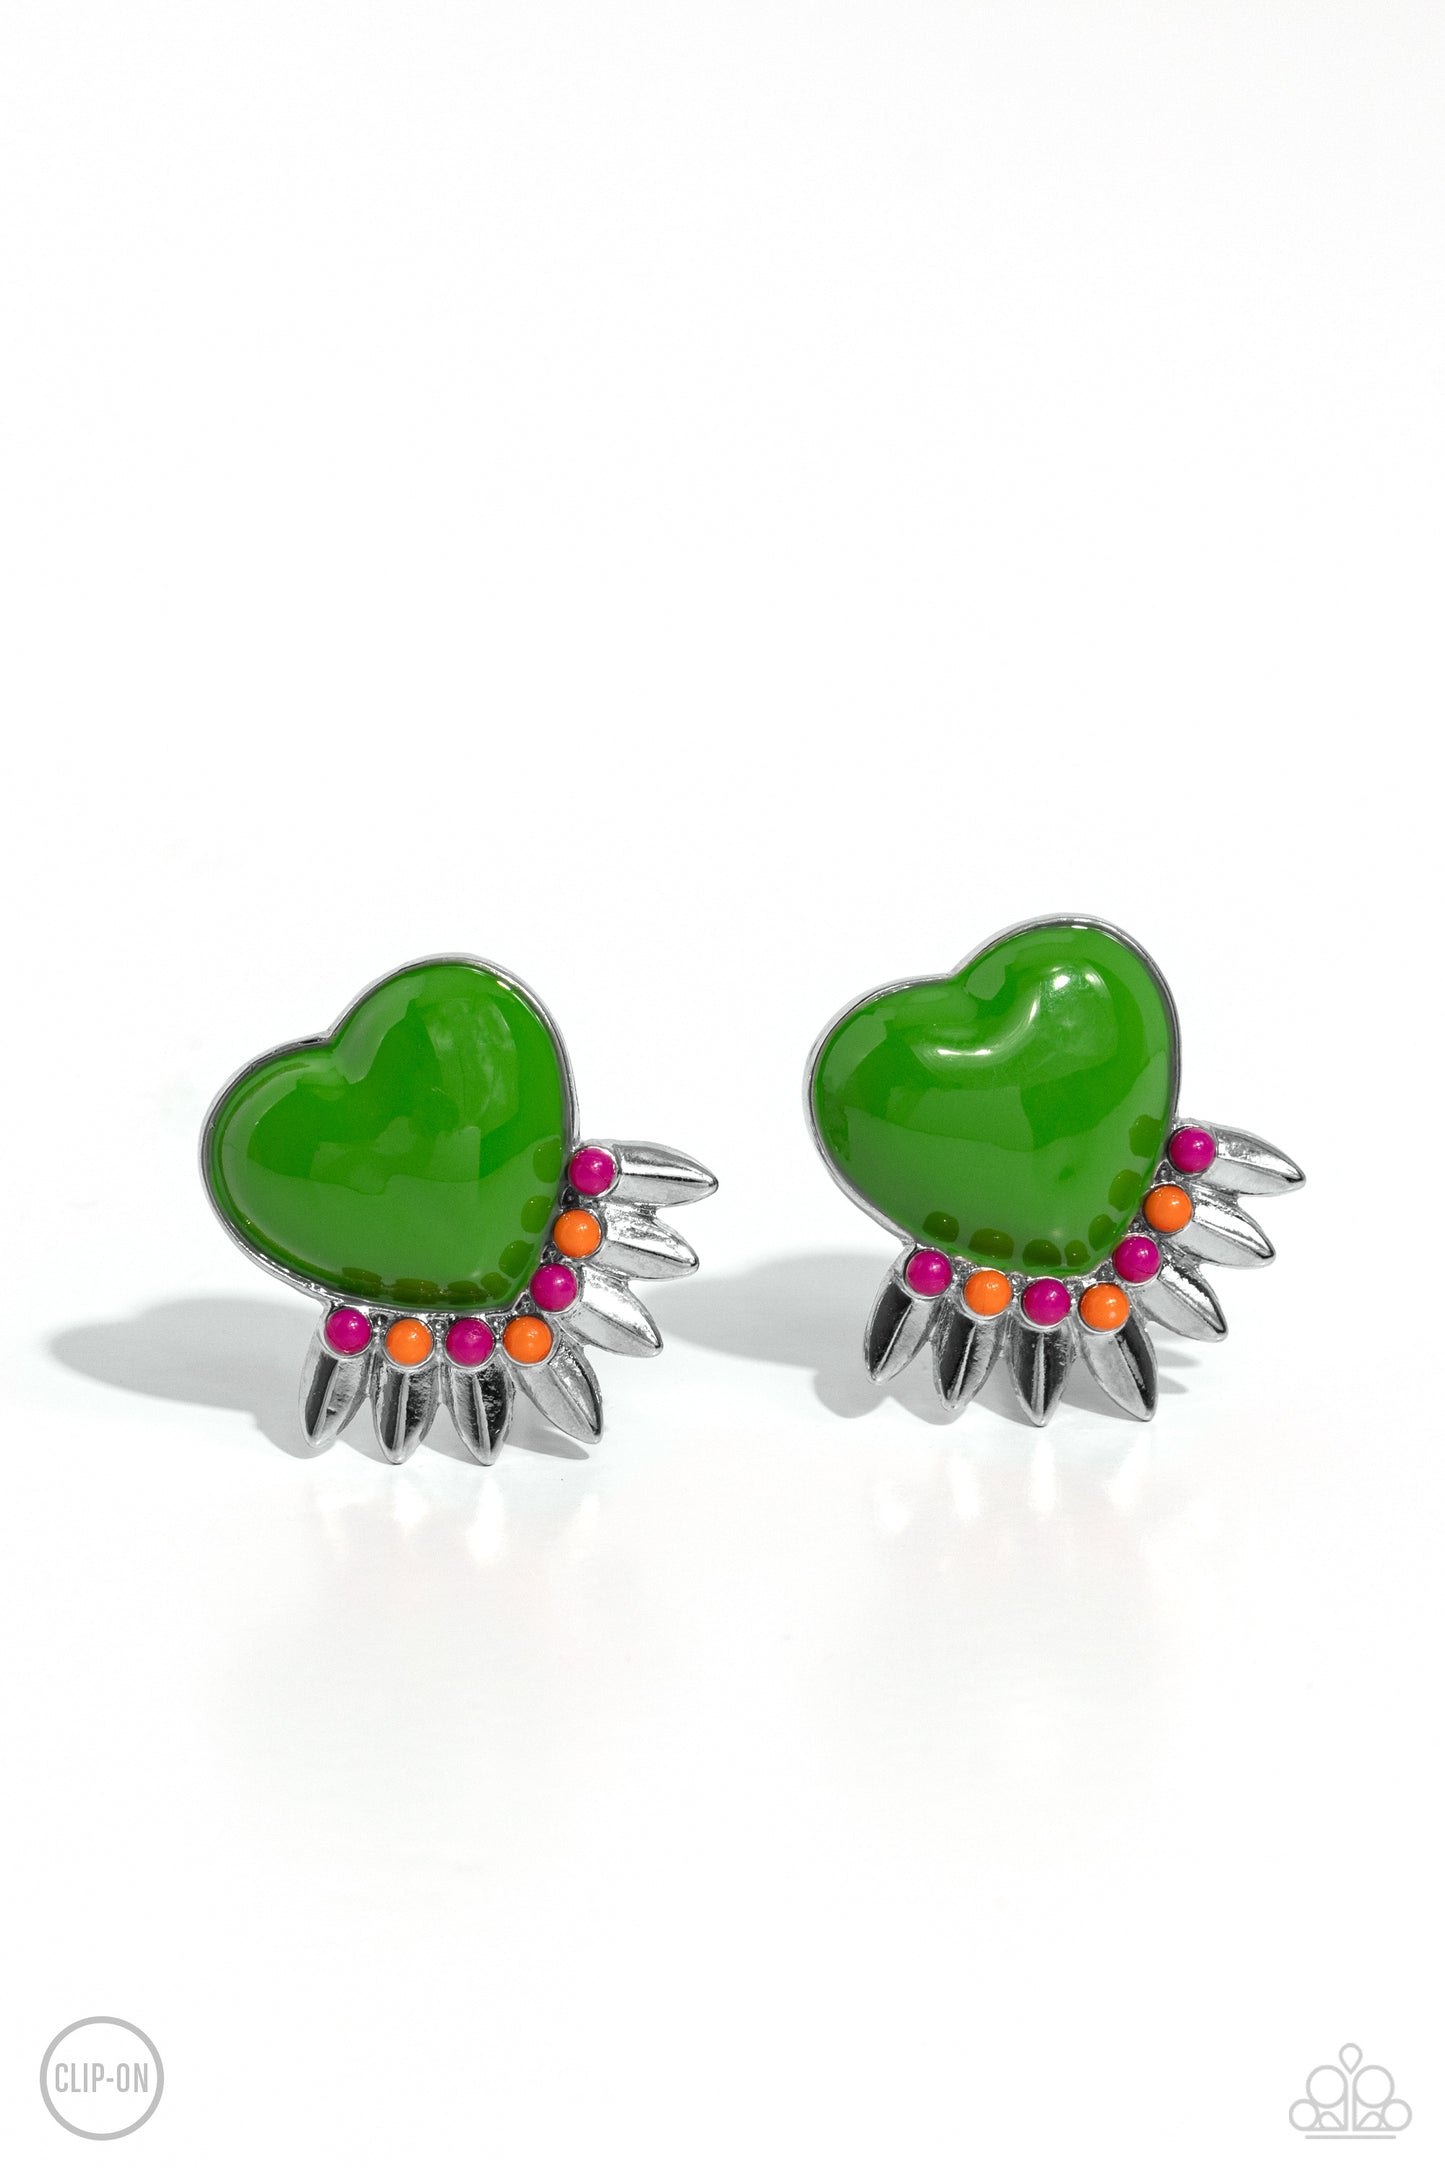 Spring Story - green - Paparazzi CLIP ON earrings